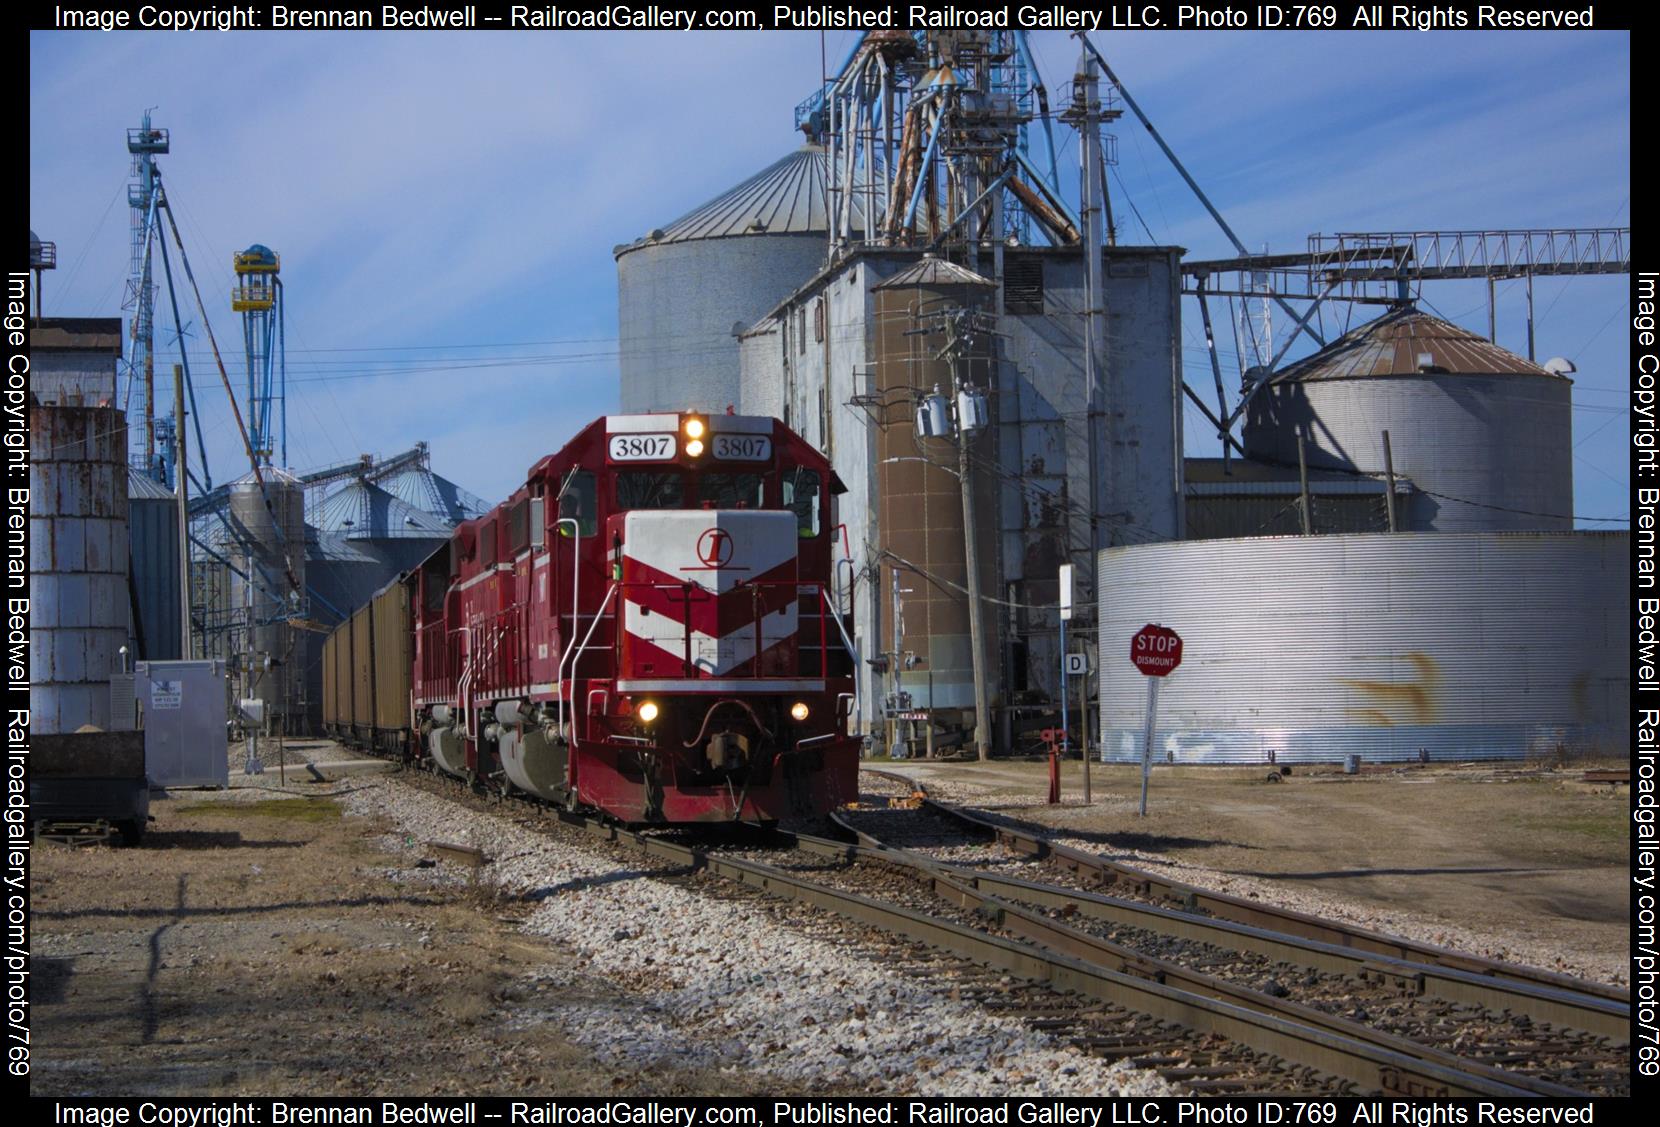 INRD 3807 is a class GP38-2 and  is pictured in Palestine, Illinois, United States.  This was taken along the Indianapolis Subdivision on the Indiana Rail Road. Photo Copyright: Brennan Bedwell uploaded to Railroad Gallery on 02/27/2023. This photograph of INRD 3807 was taken on Monday, February 20, 2023. All Rights Reserved. 